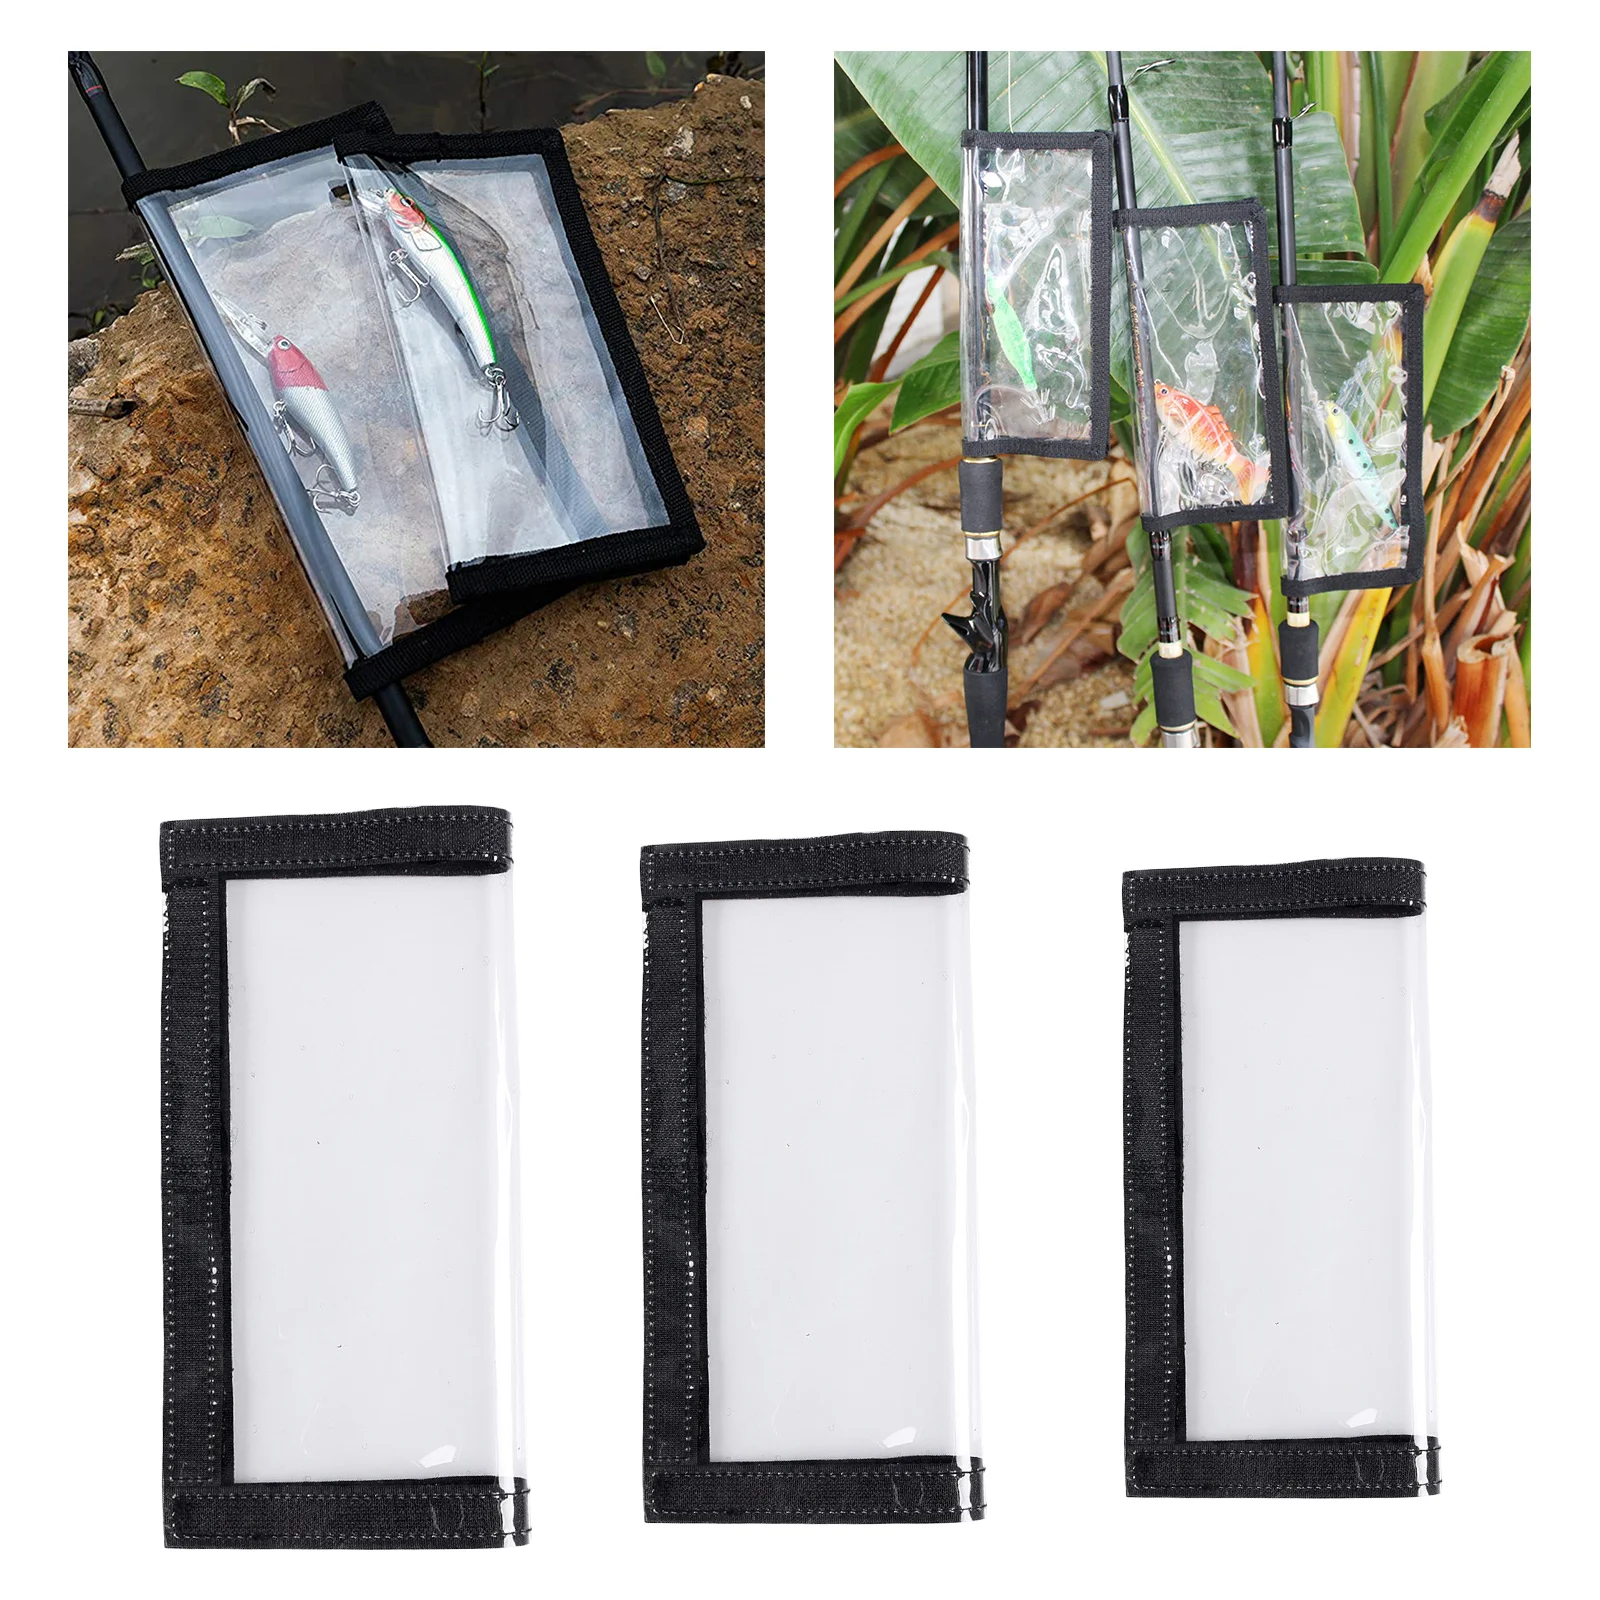 Fishing Lure Wraps Fishing Lure Cover Lure Wrap Lures Protective Covers Clear PVC Lure Covers